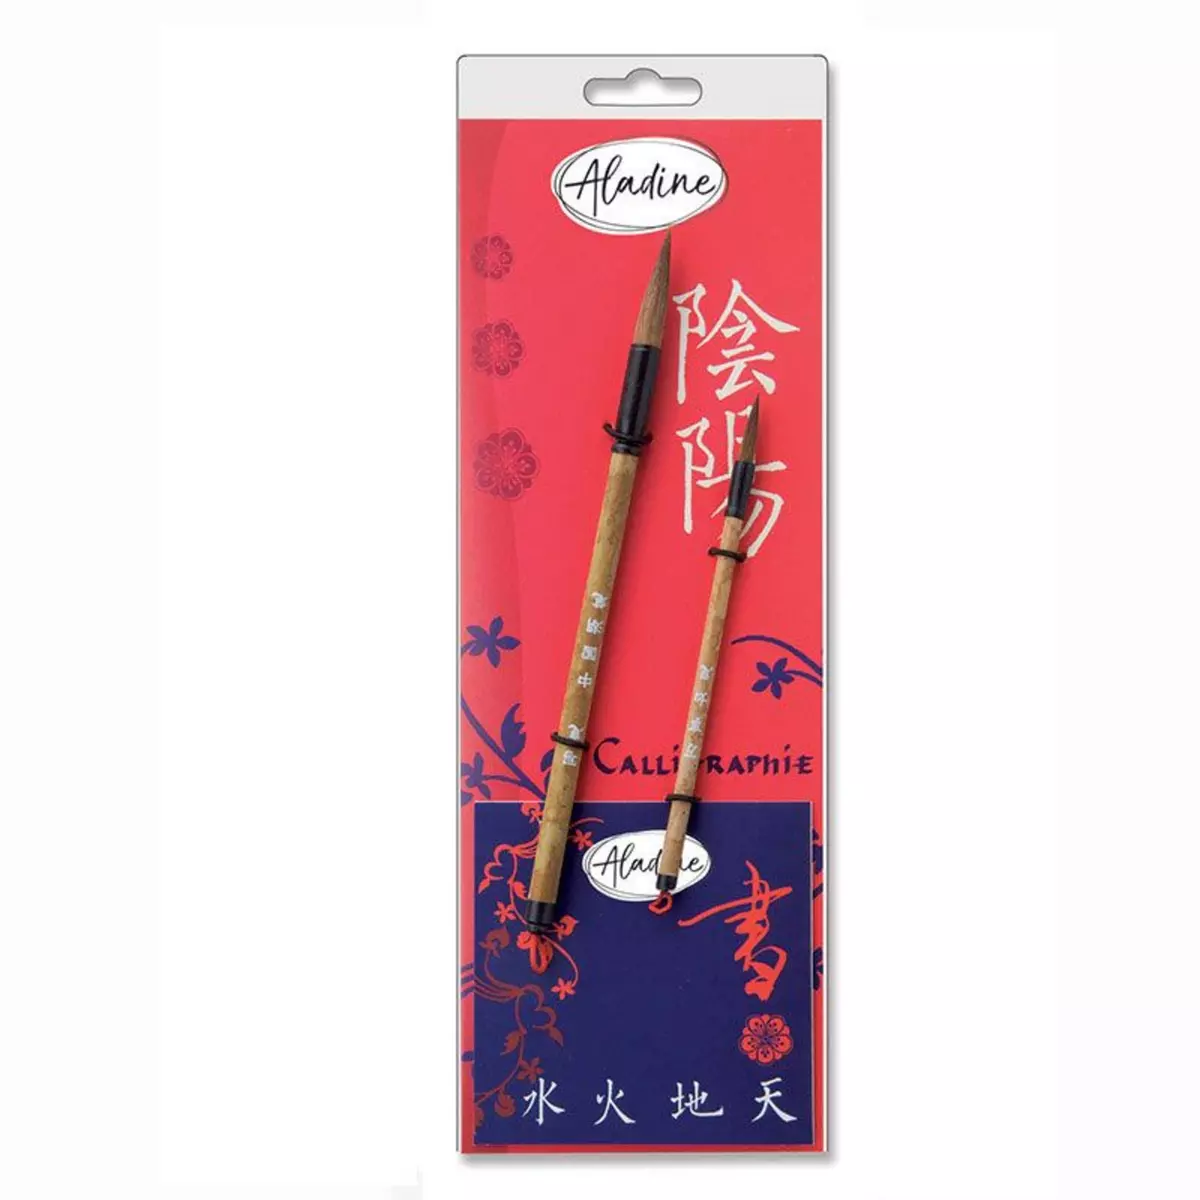 Aladine Kit d'outils de calligraphie chinoise